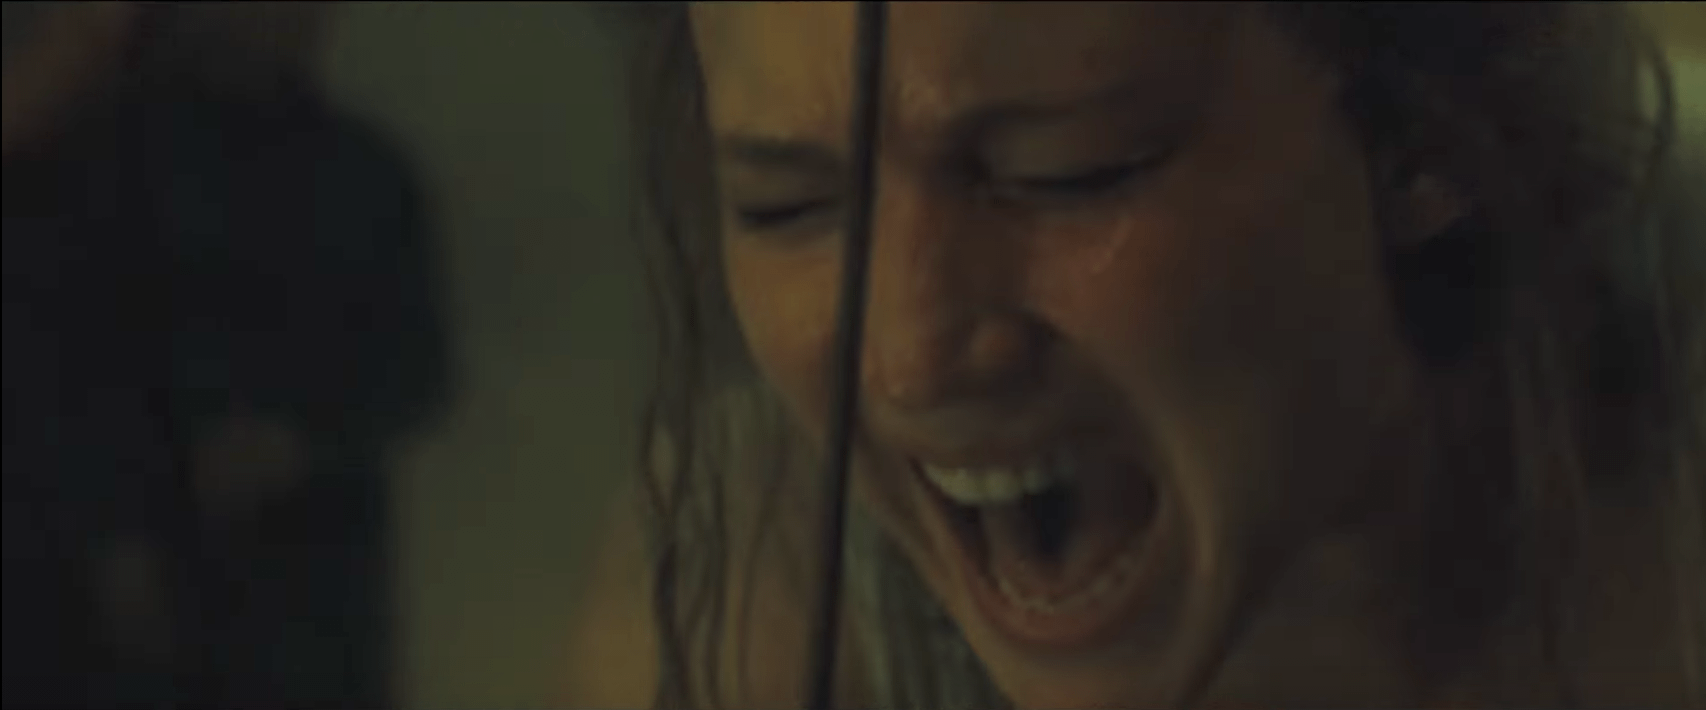 Jennifer Lawrence Not About To See Your Light In First Trailer For Darren Aronofsky's 'Mother!'